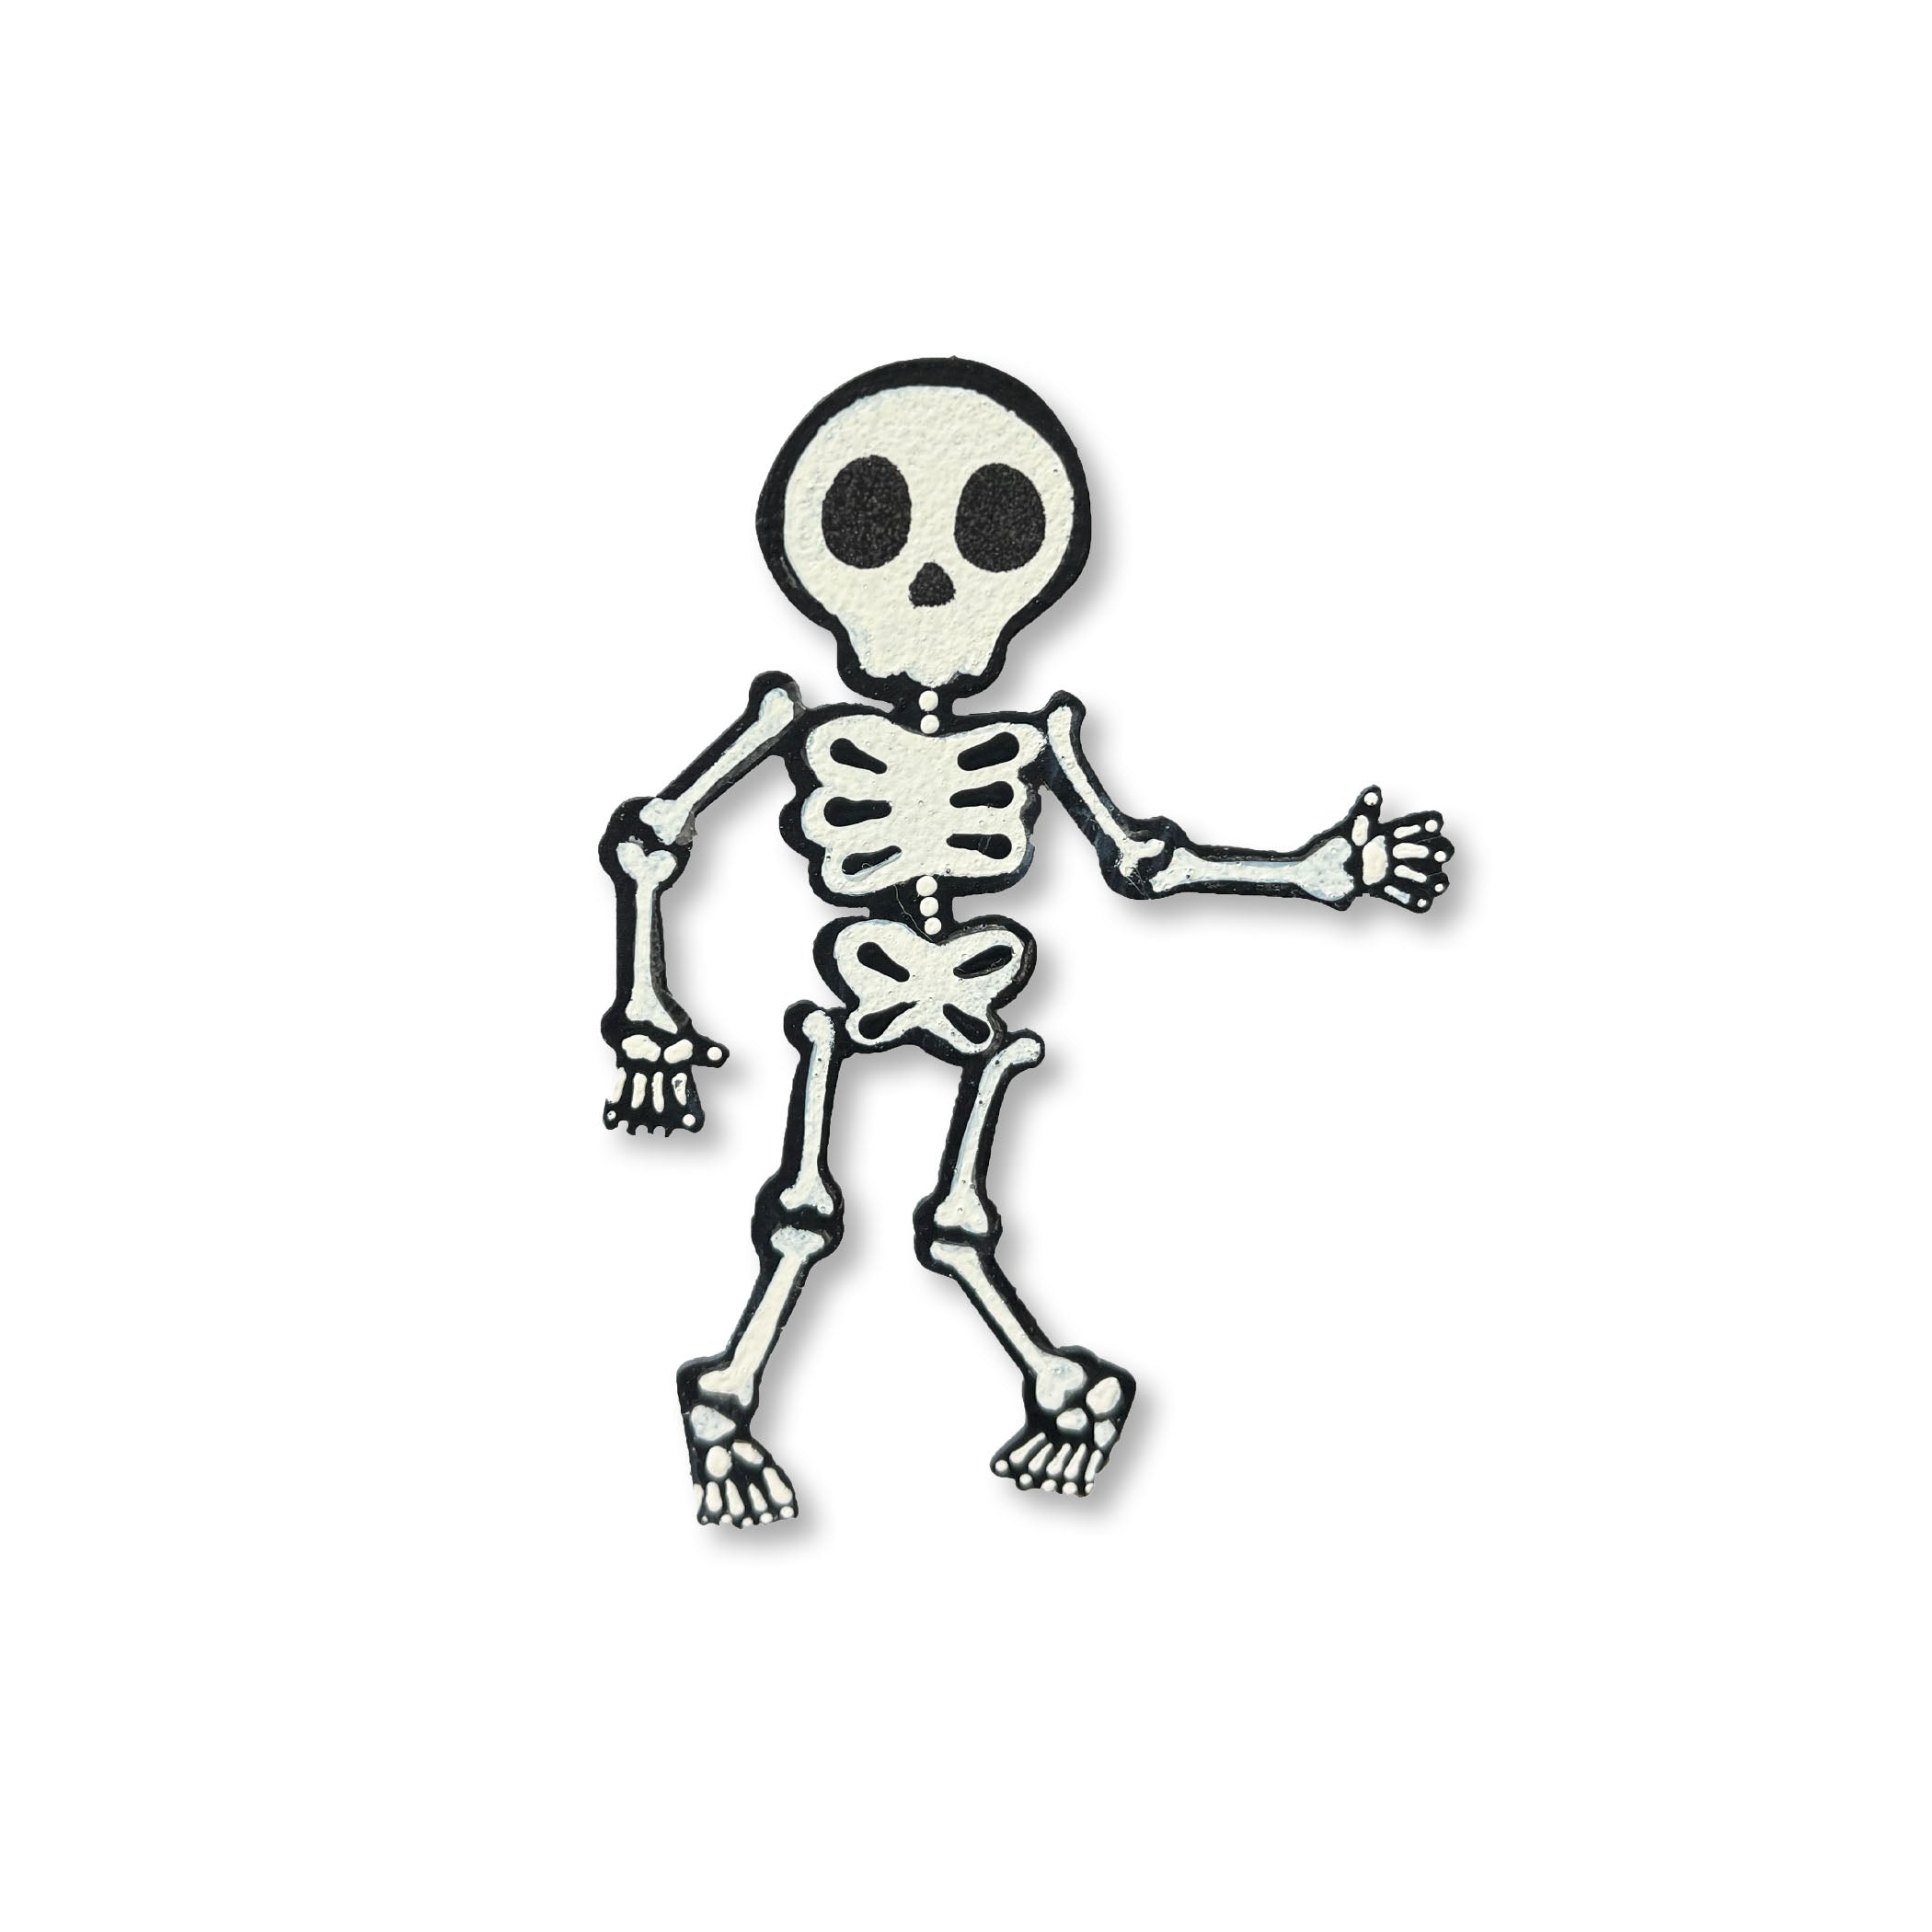 cute skeleton clipart black and white